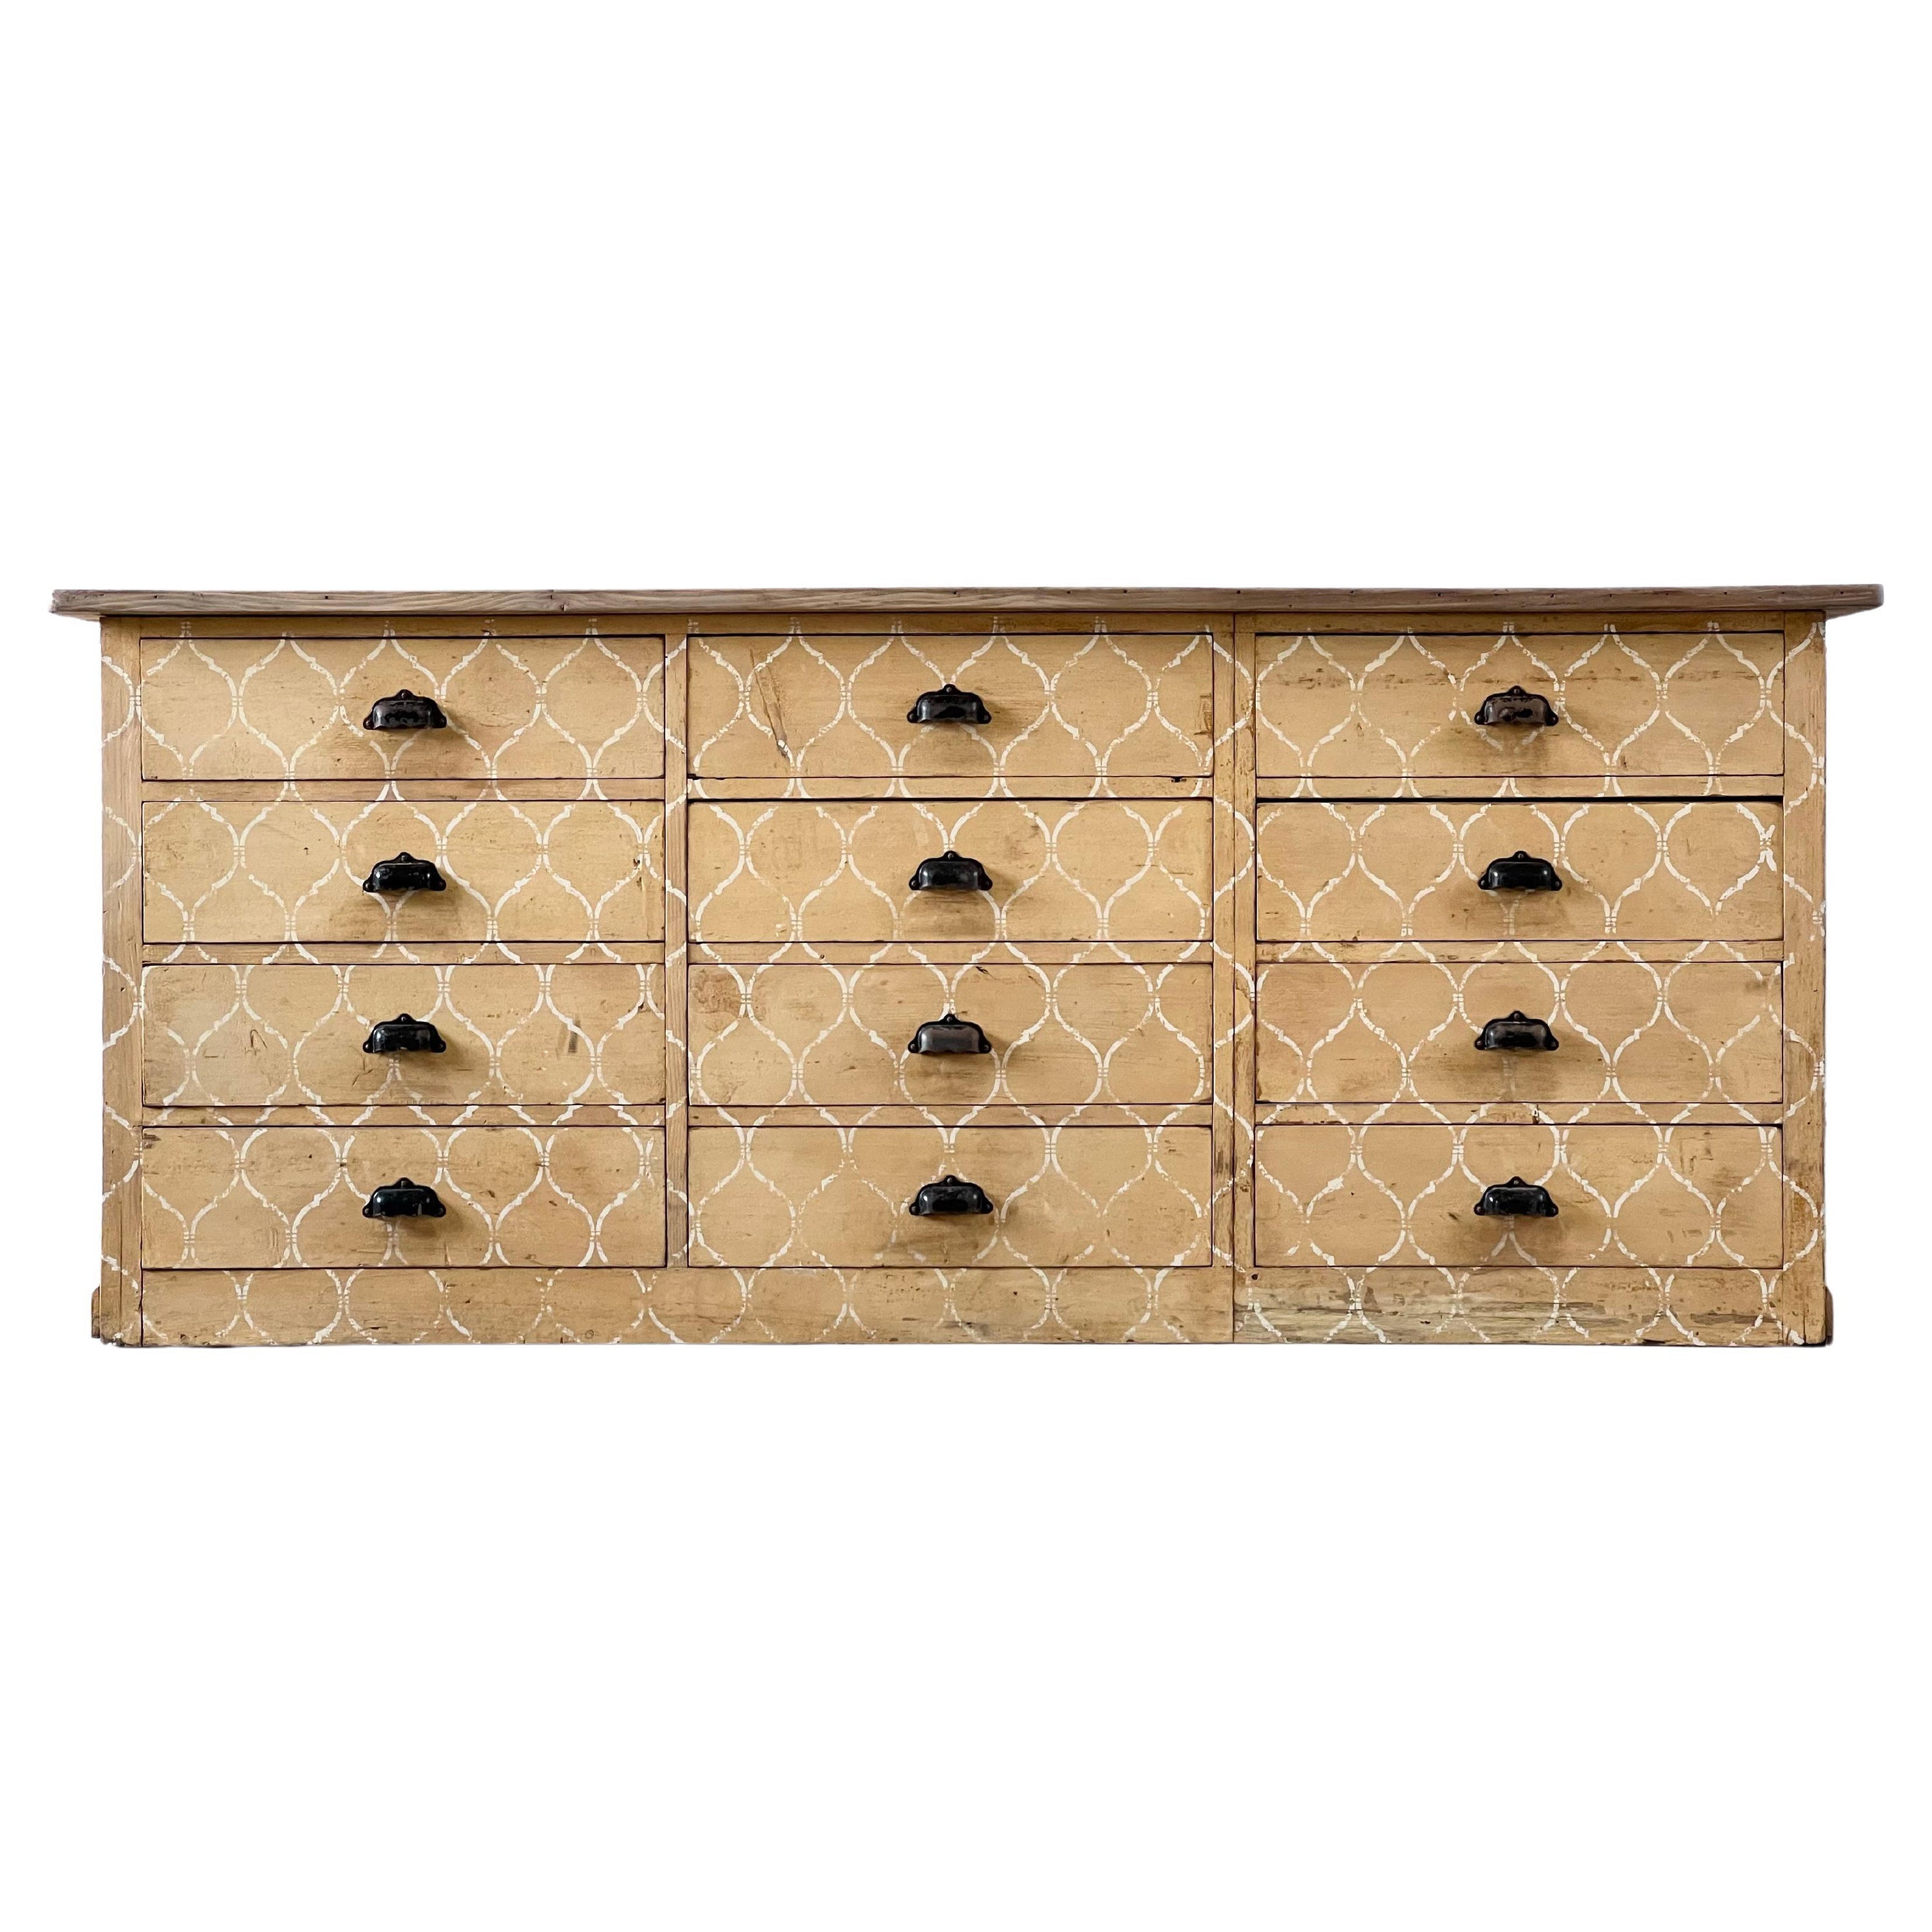 Decorative Painted French Bank of Drawers